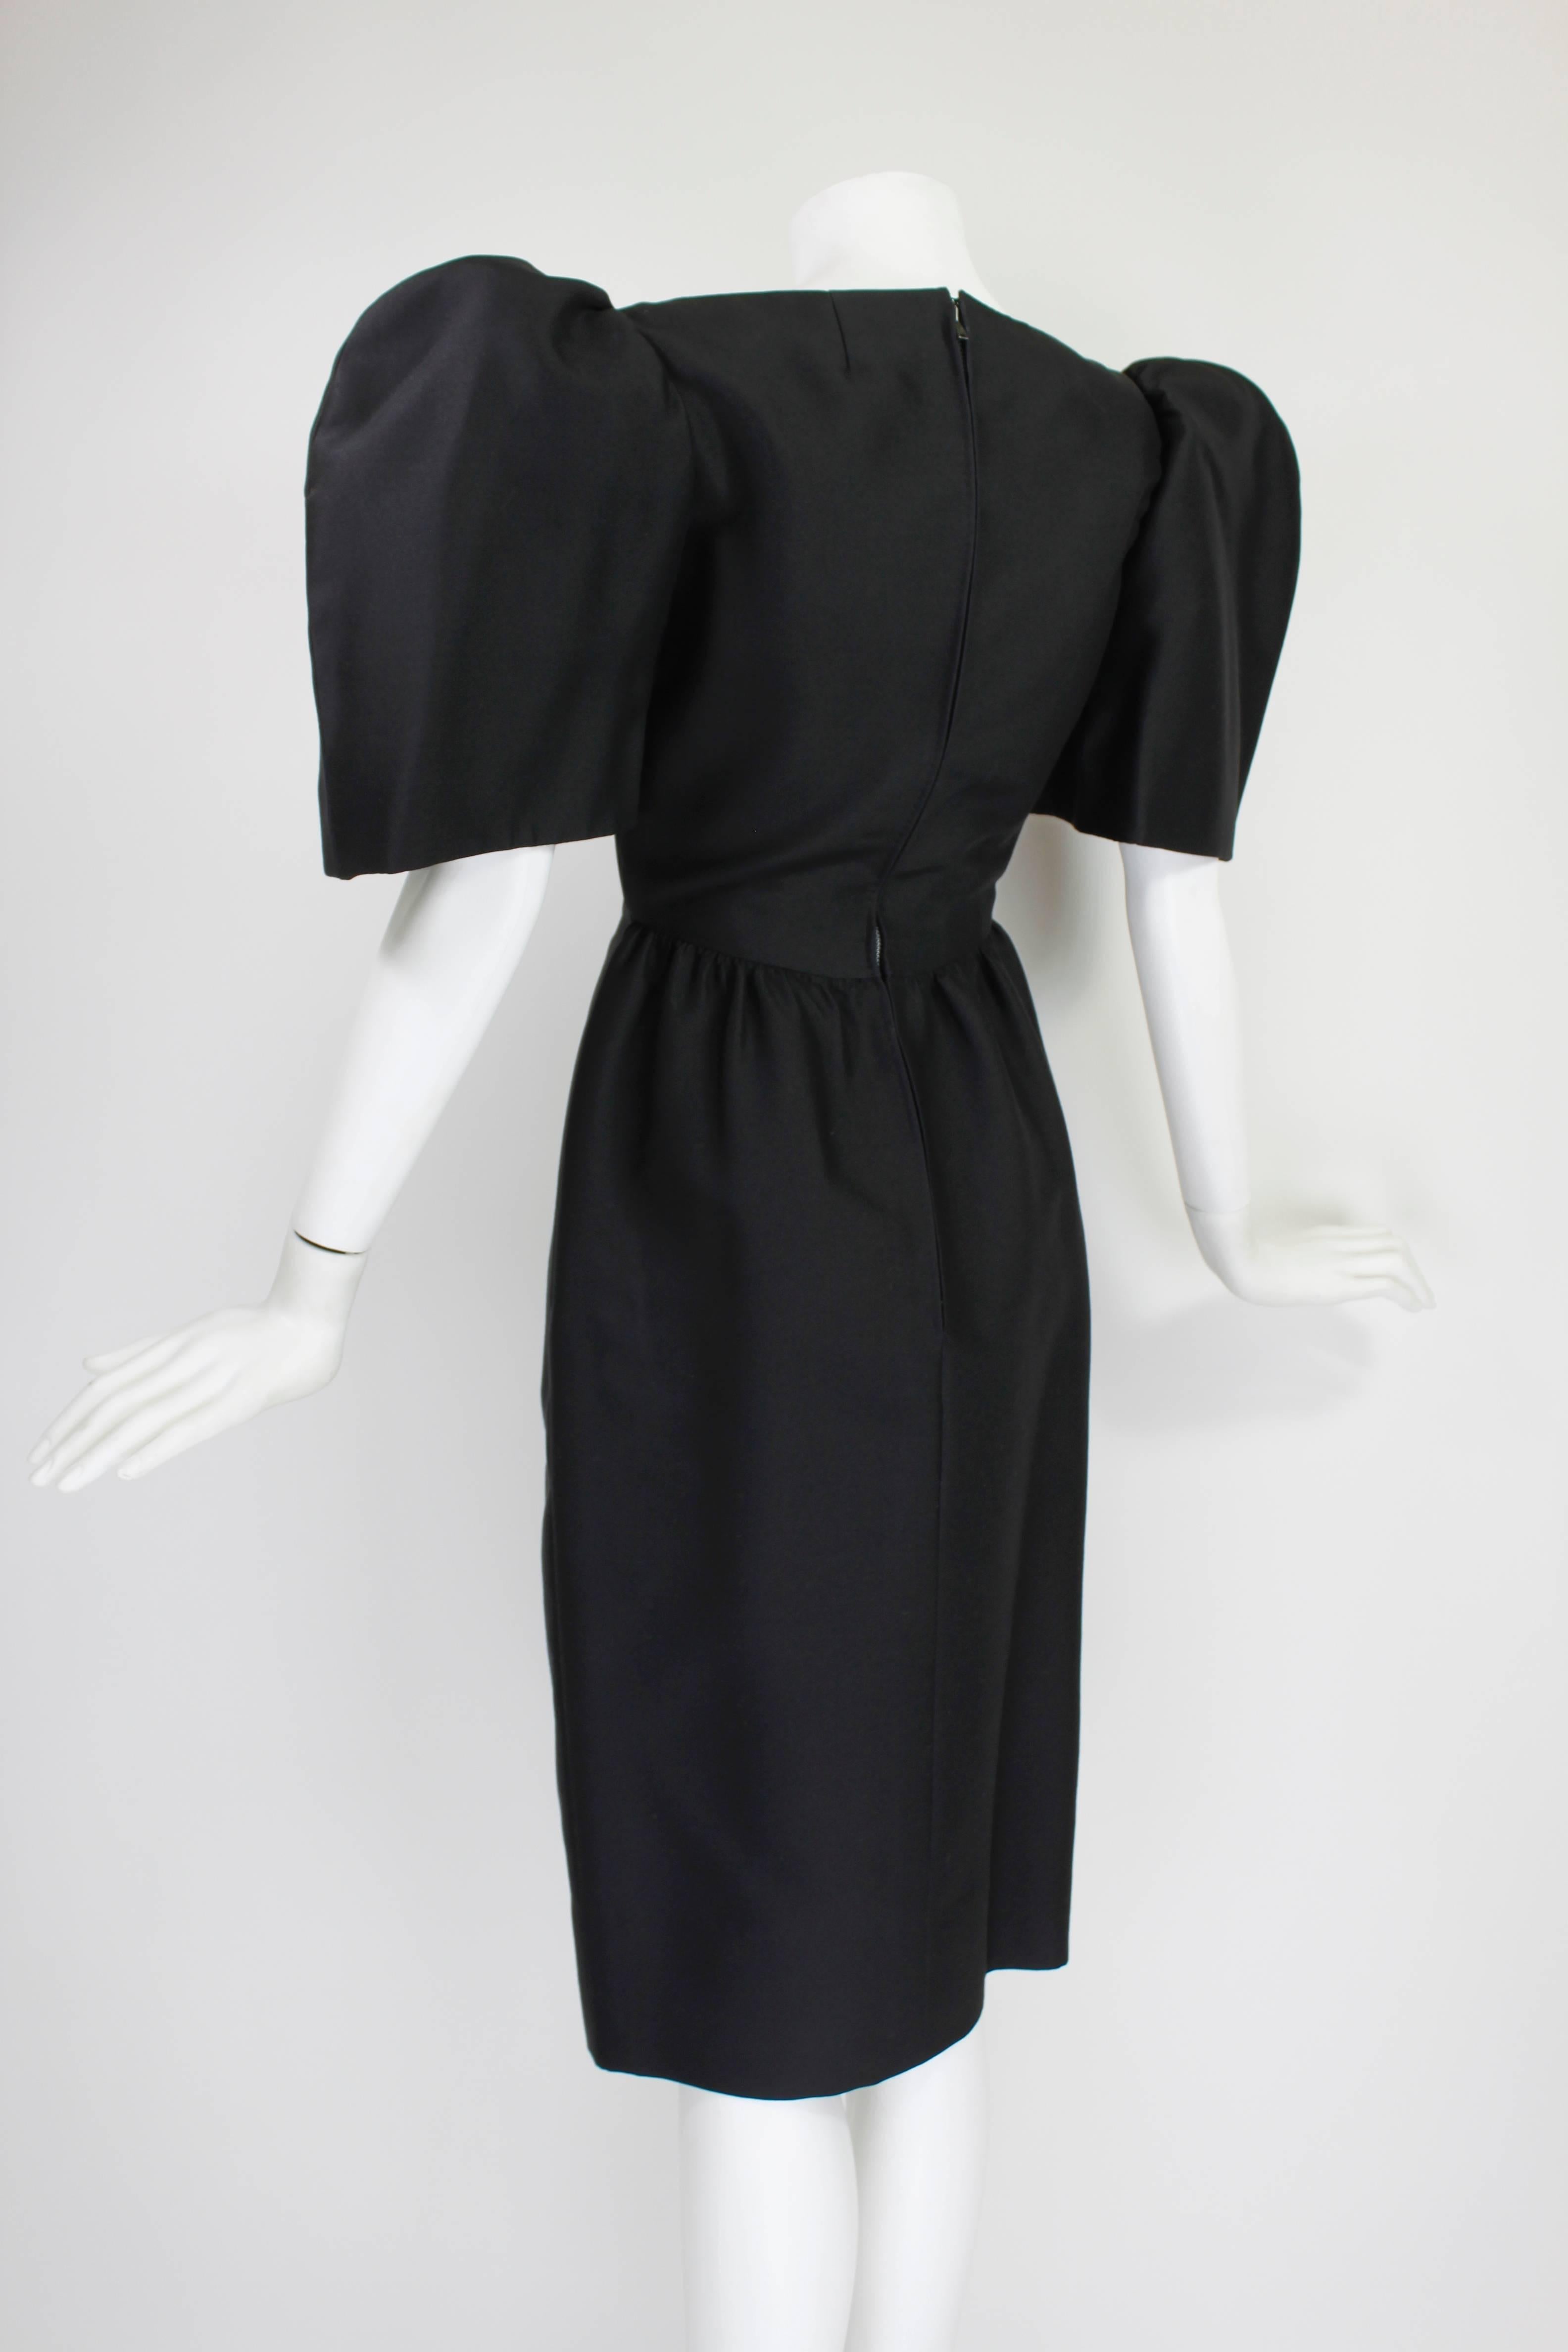 Black Late 1950s Galanos Architectural Cocktail Dress